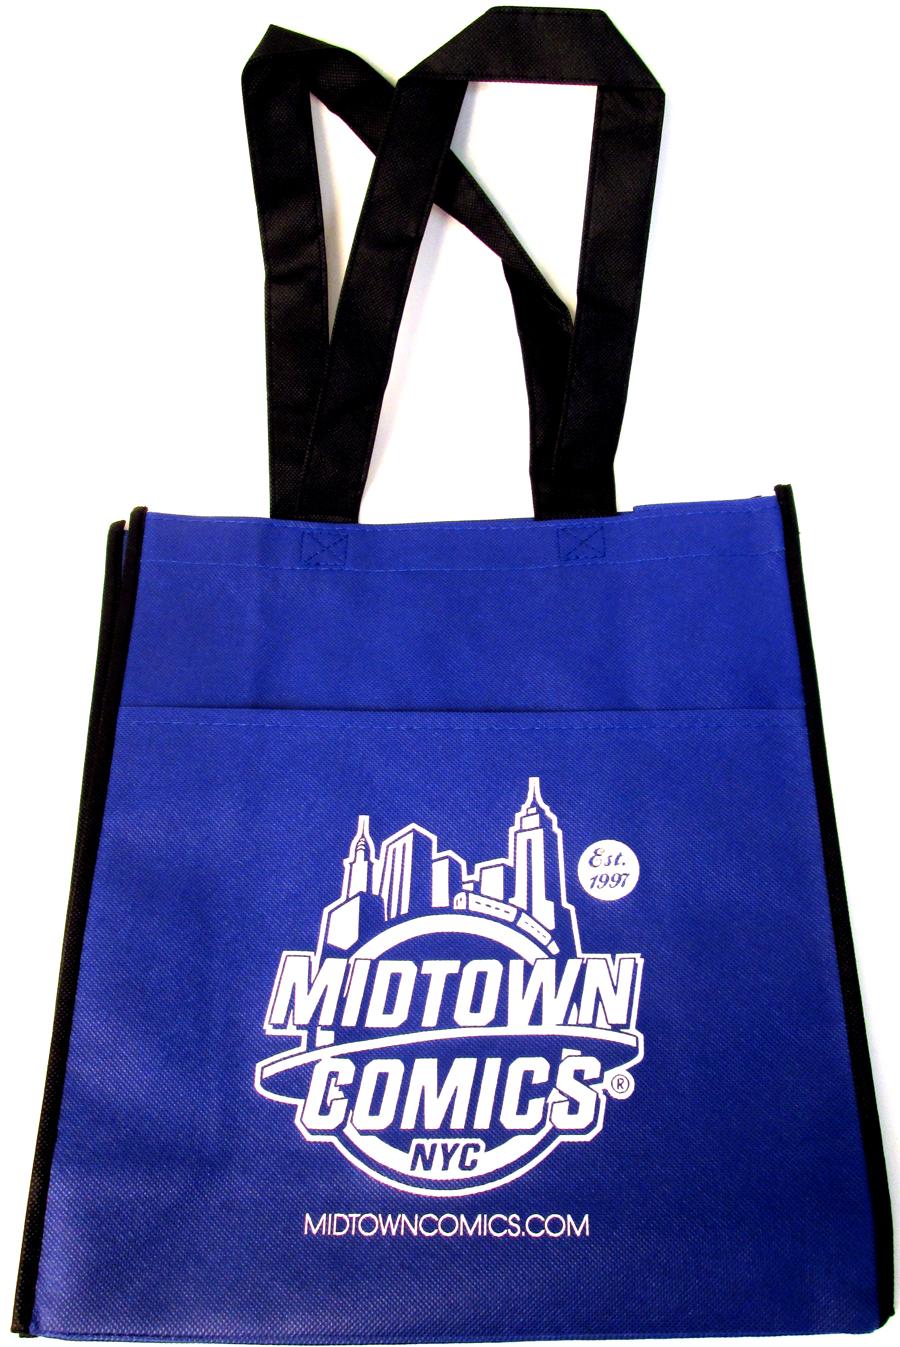 Midtown Comics Logo Recycled Shopper Tote (13.5-in x 12-in x 4.5-in)